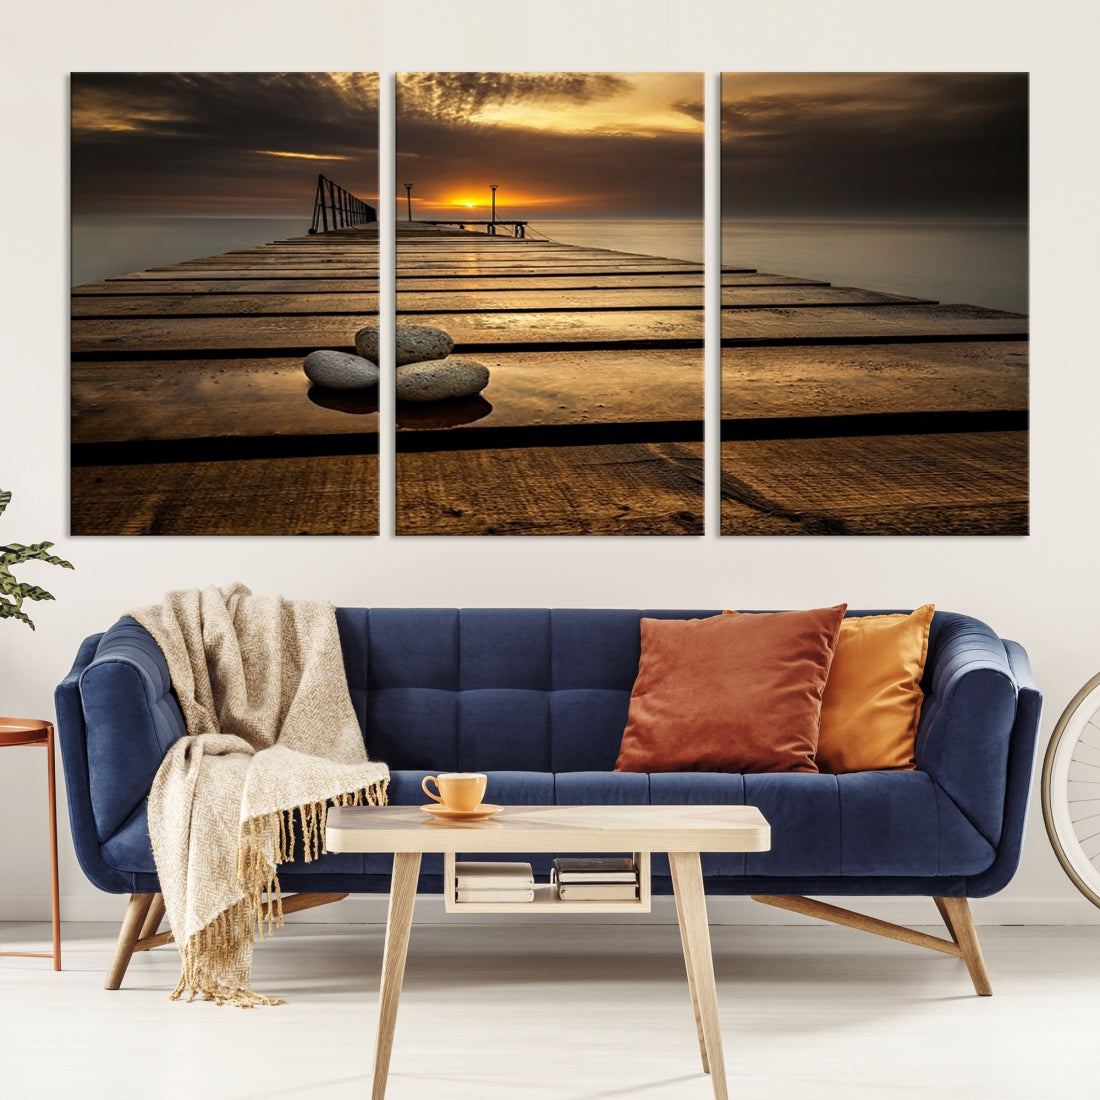 Stones on Wooden Pier at Sunset Large Wall Art Canvas